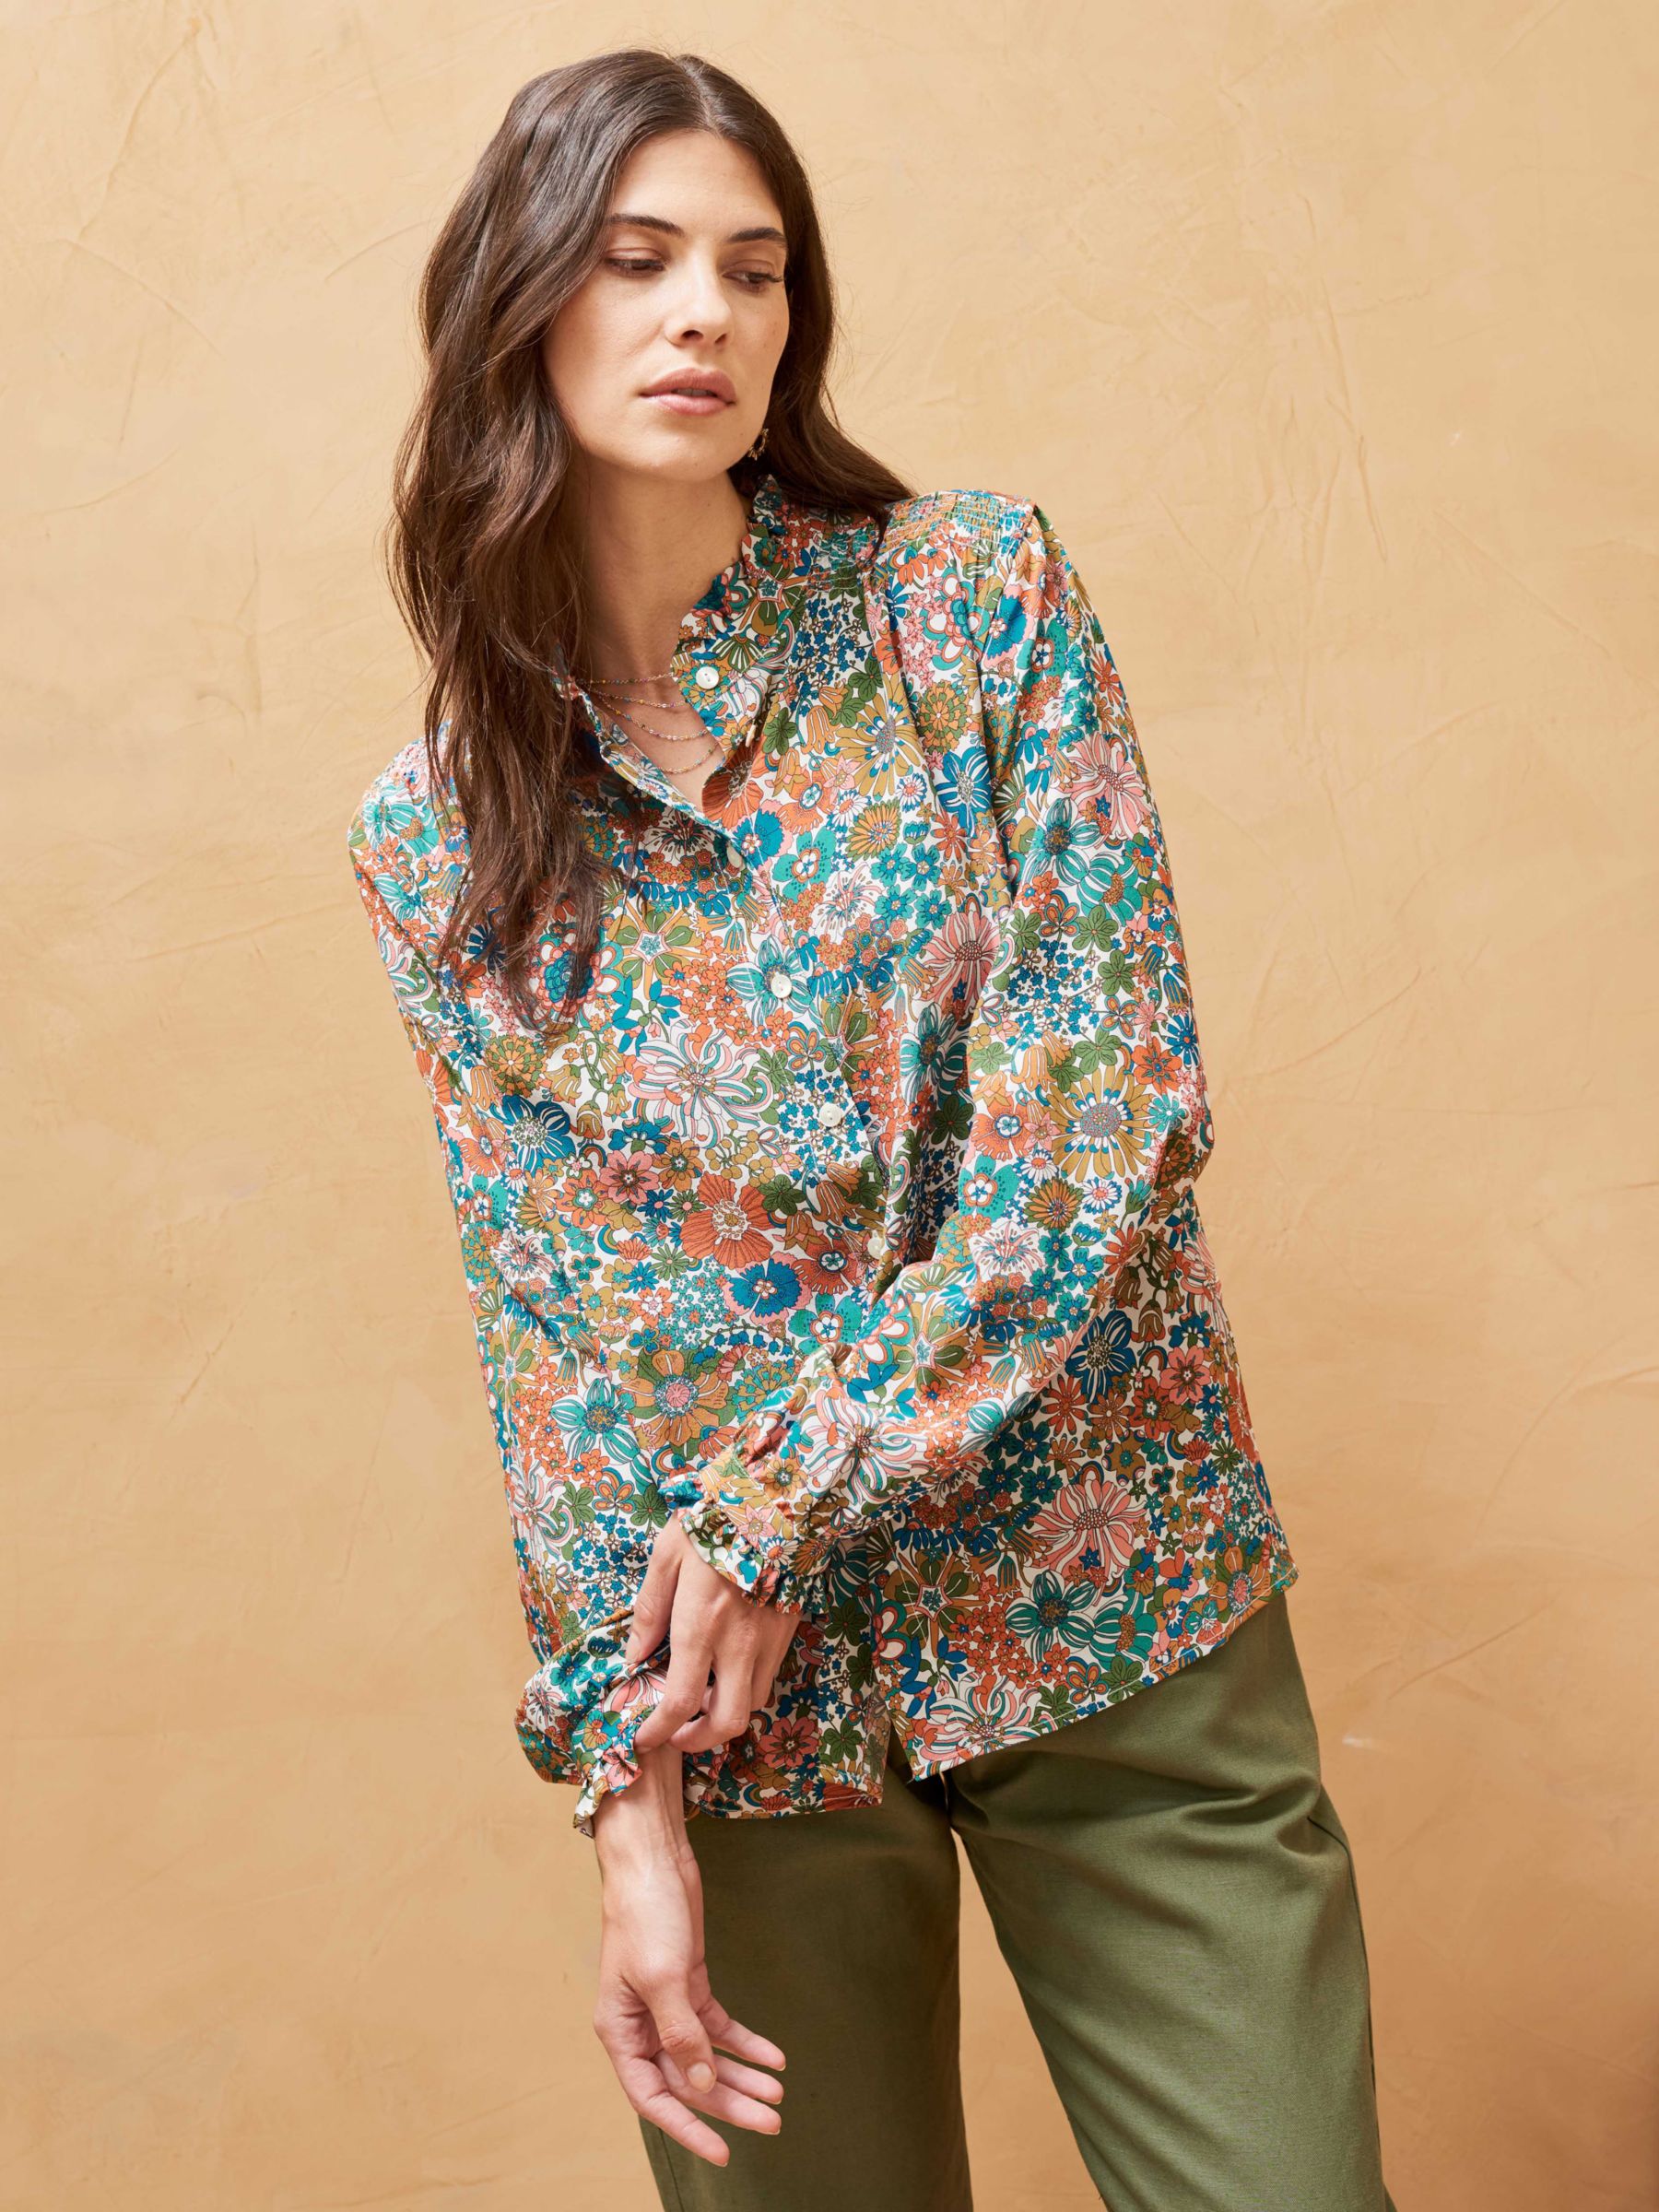 Buy Joules Rhea Long Sleeve Blouse with Frill Neck from the Joules